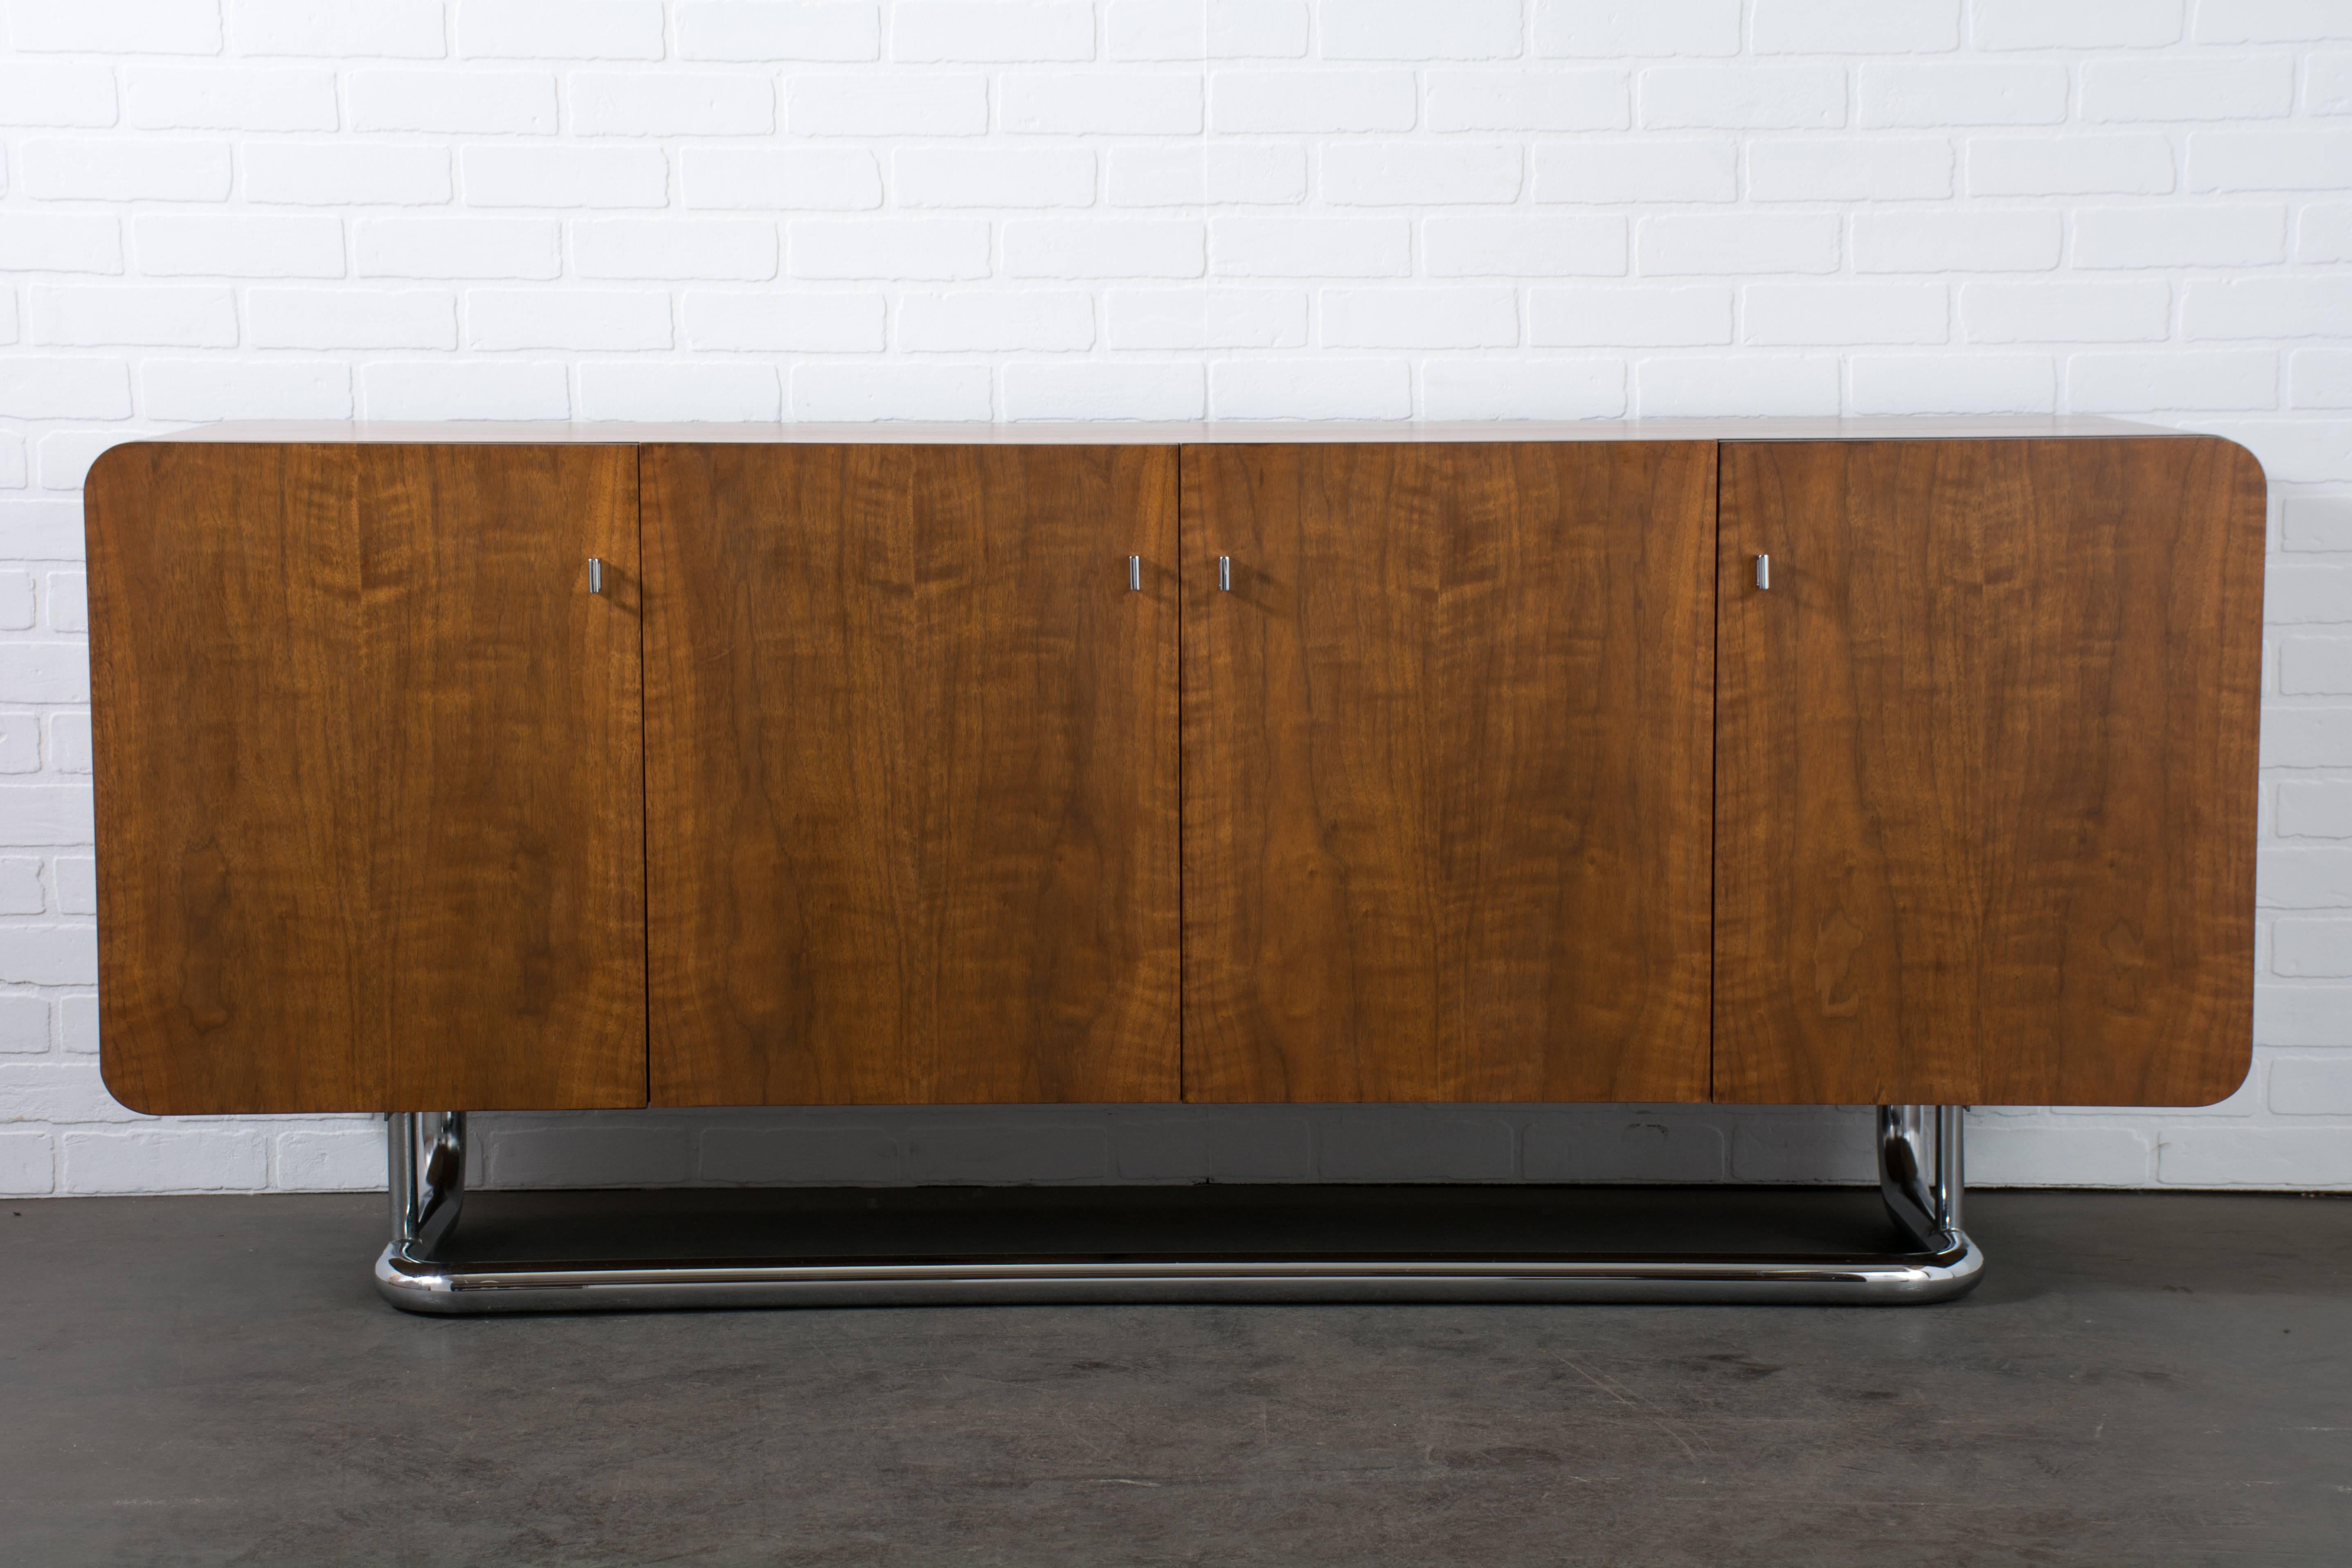 This Mid-Century Modern walnut sideboard was designed by Jack Cartwright for Founders, USA, circa 1970s. It features four doors that conceal three drawers in the middle and an adjustable shelf on each side. This piece has unique details such as